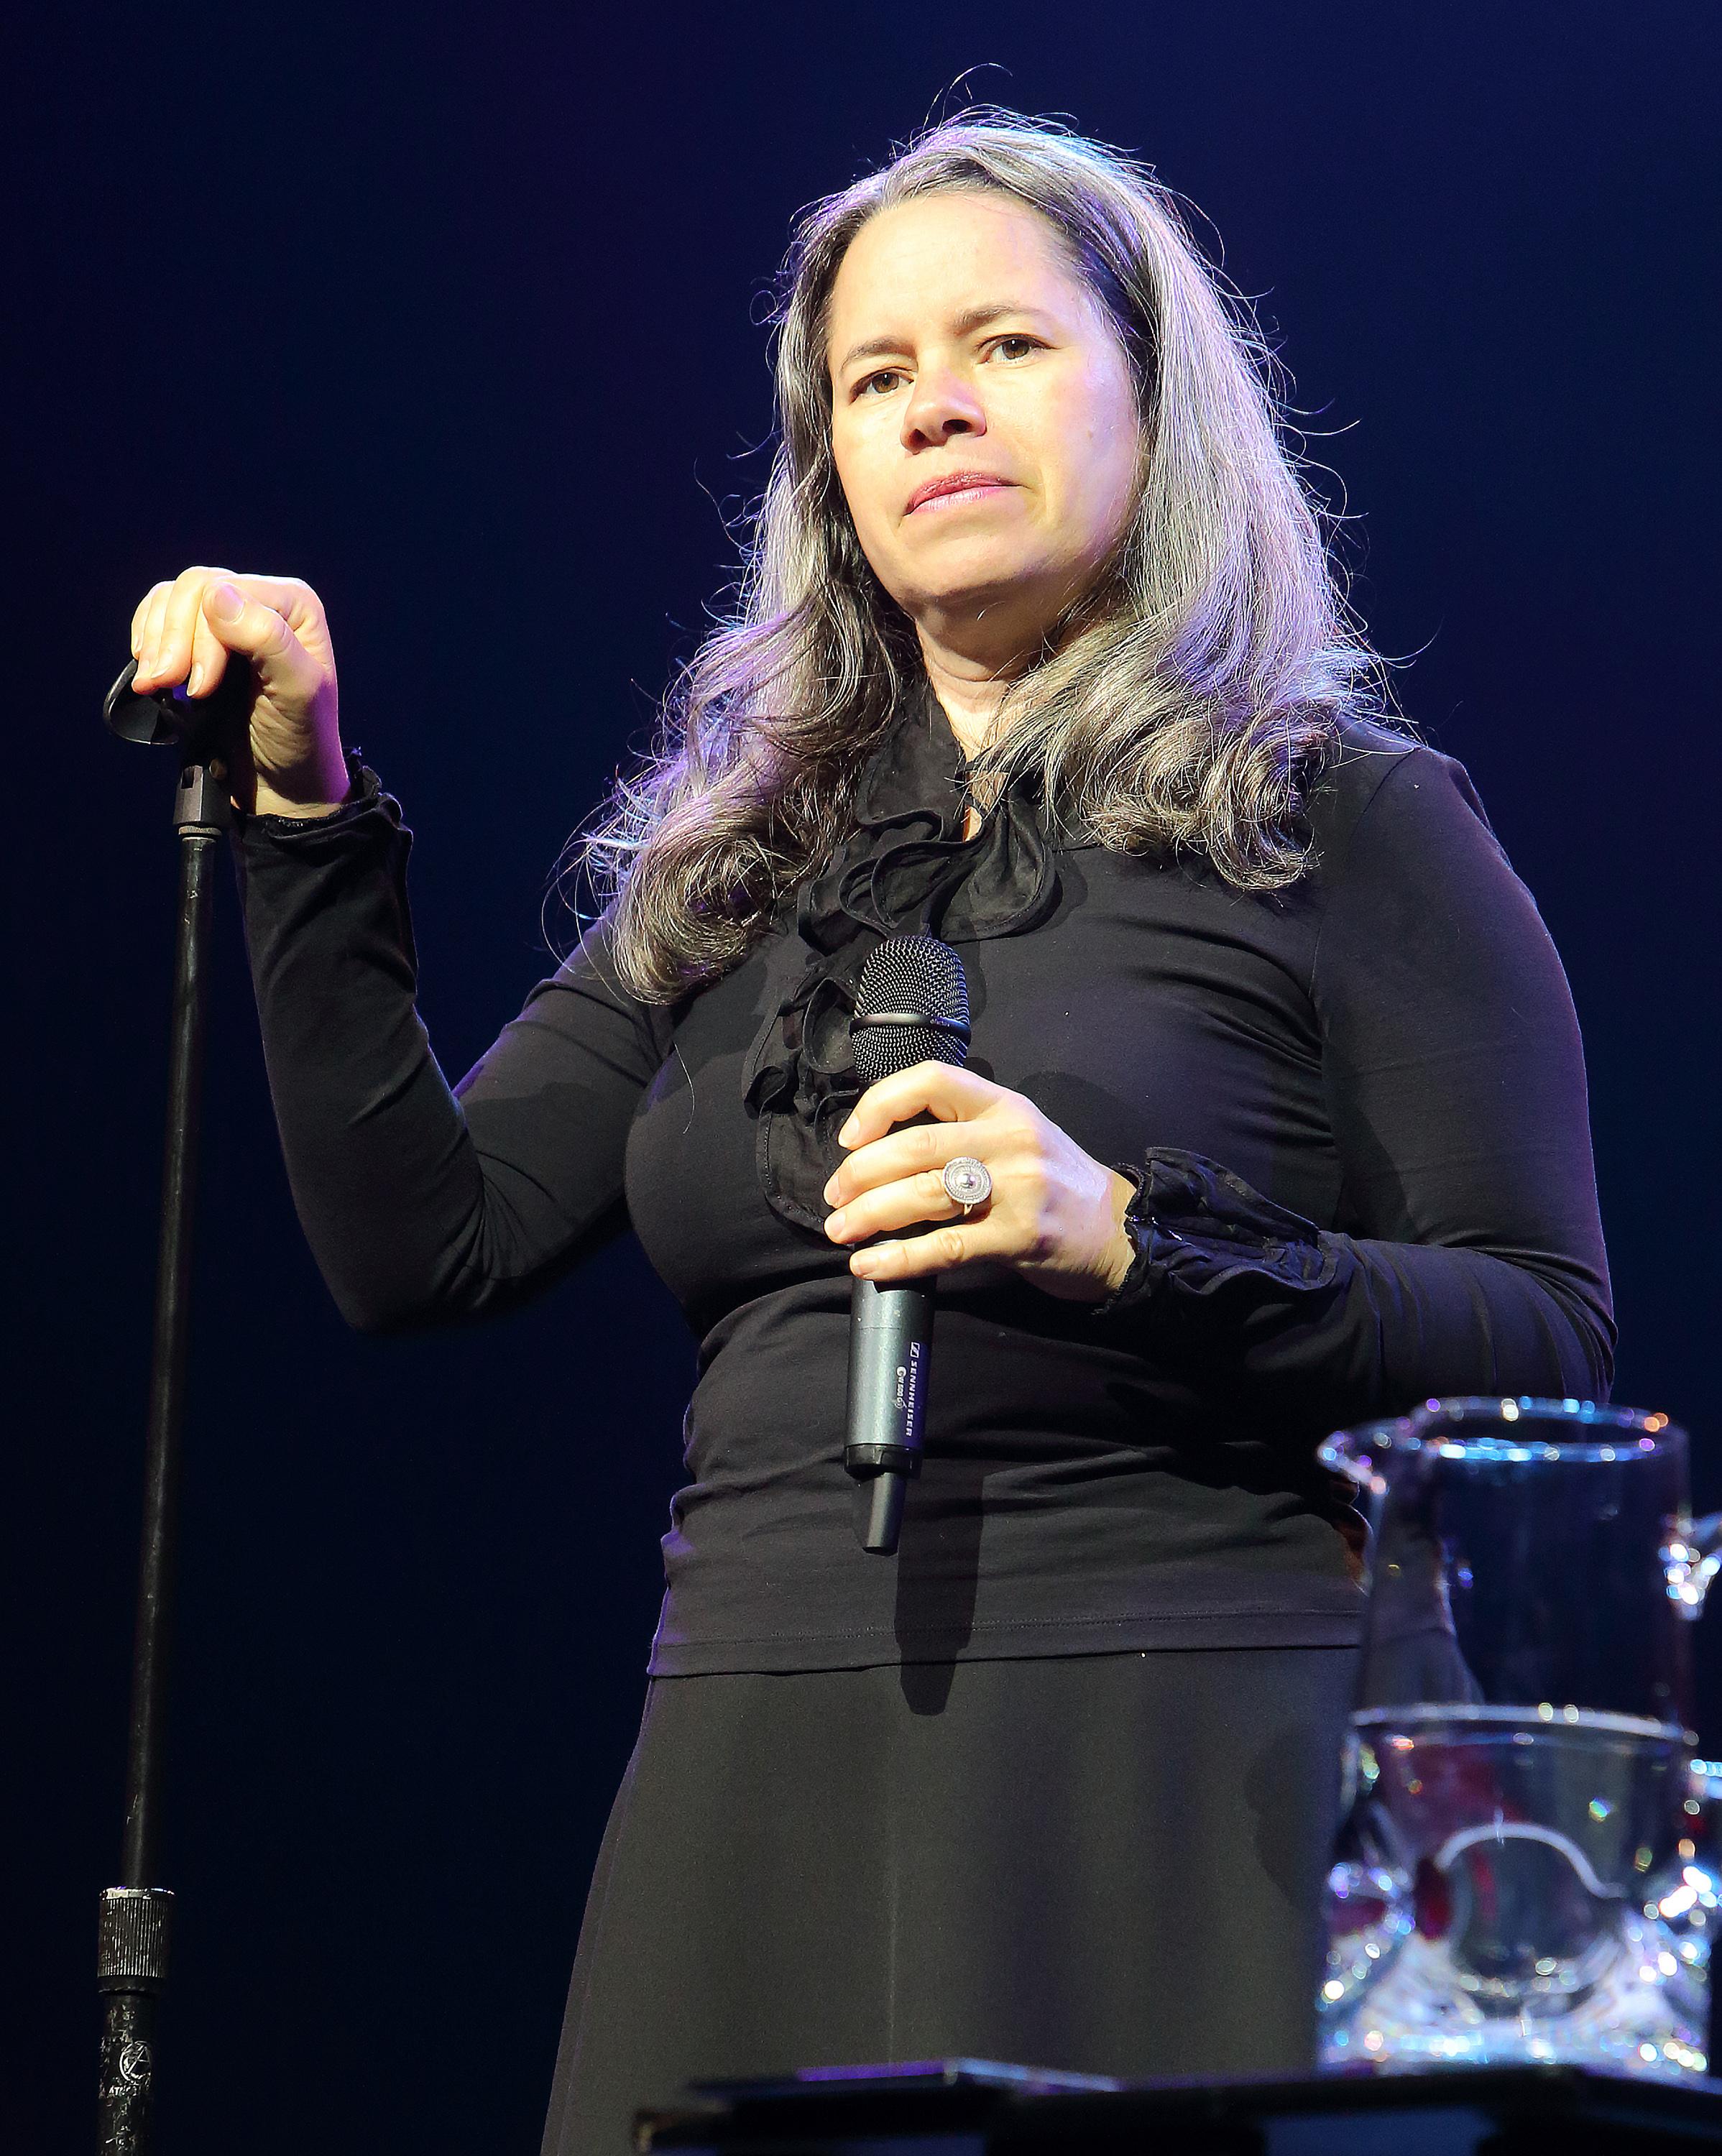 Imagine this Natalie Merchant honored with Lennon award The